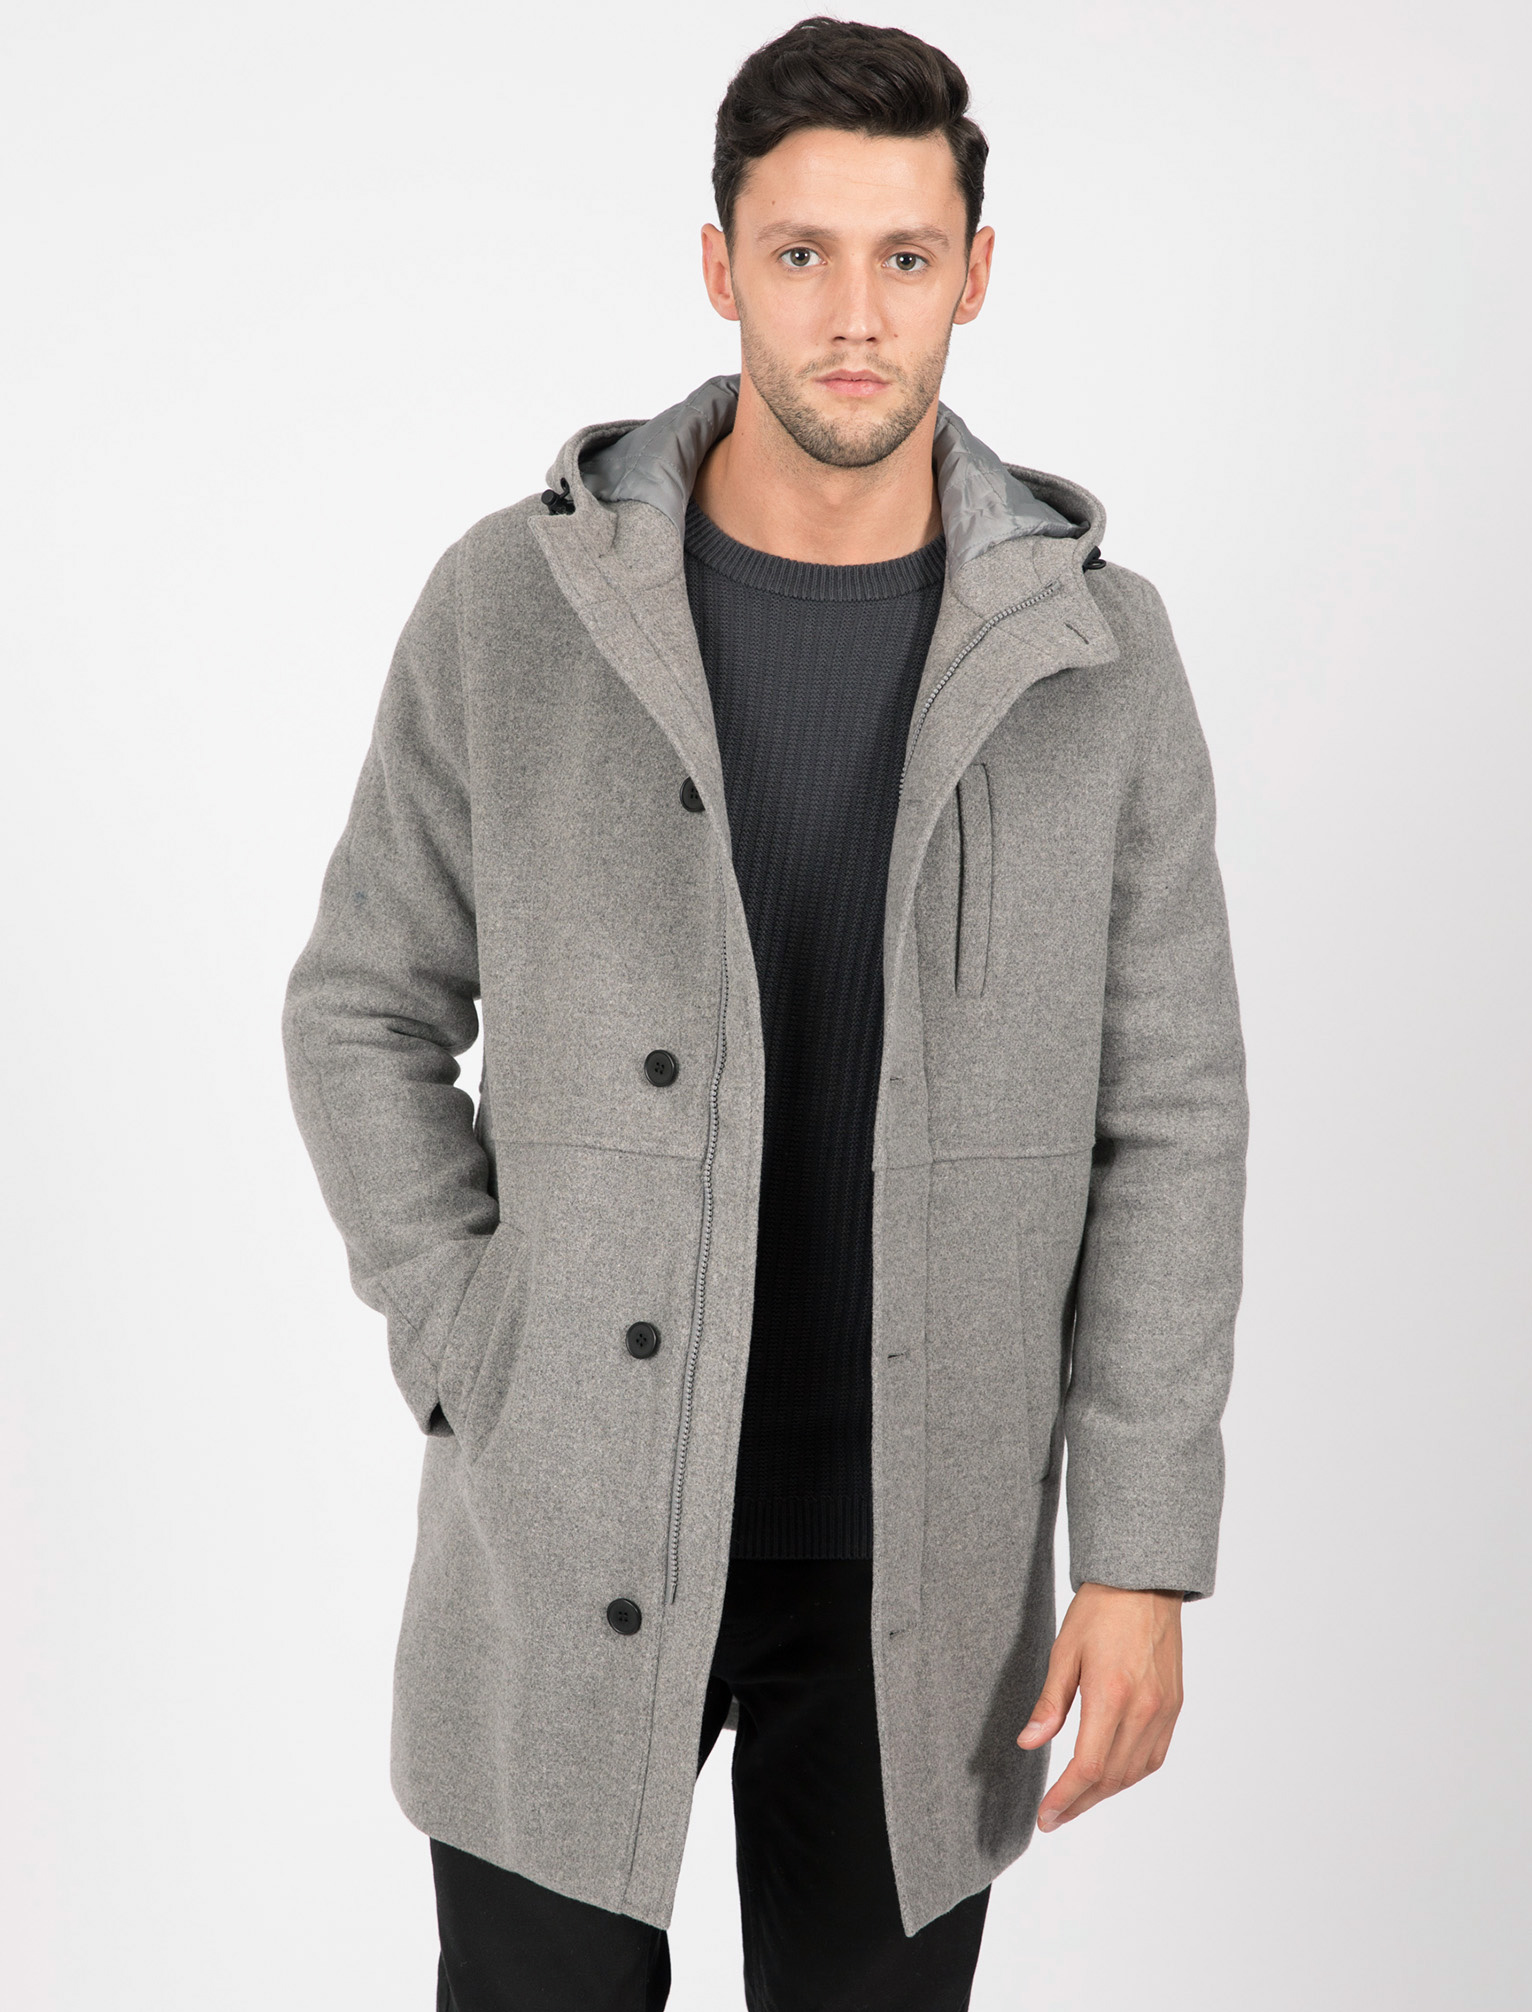 Tokyo Laundry Romano Wool Blend Winter Duffle Coat with Hood Size S M L ...